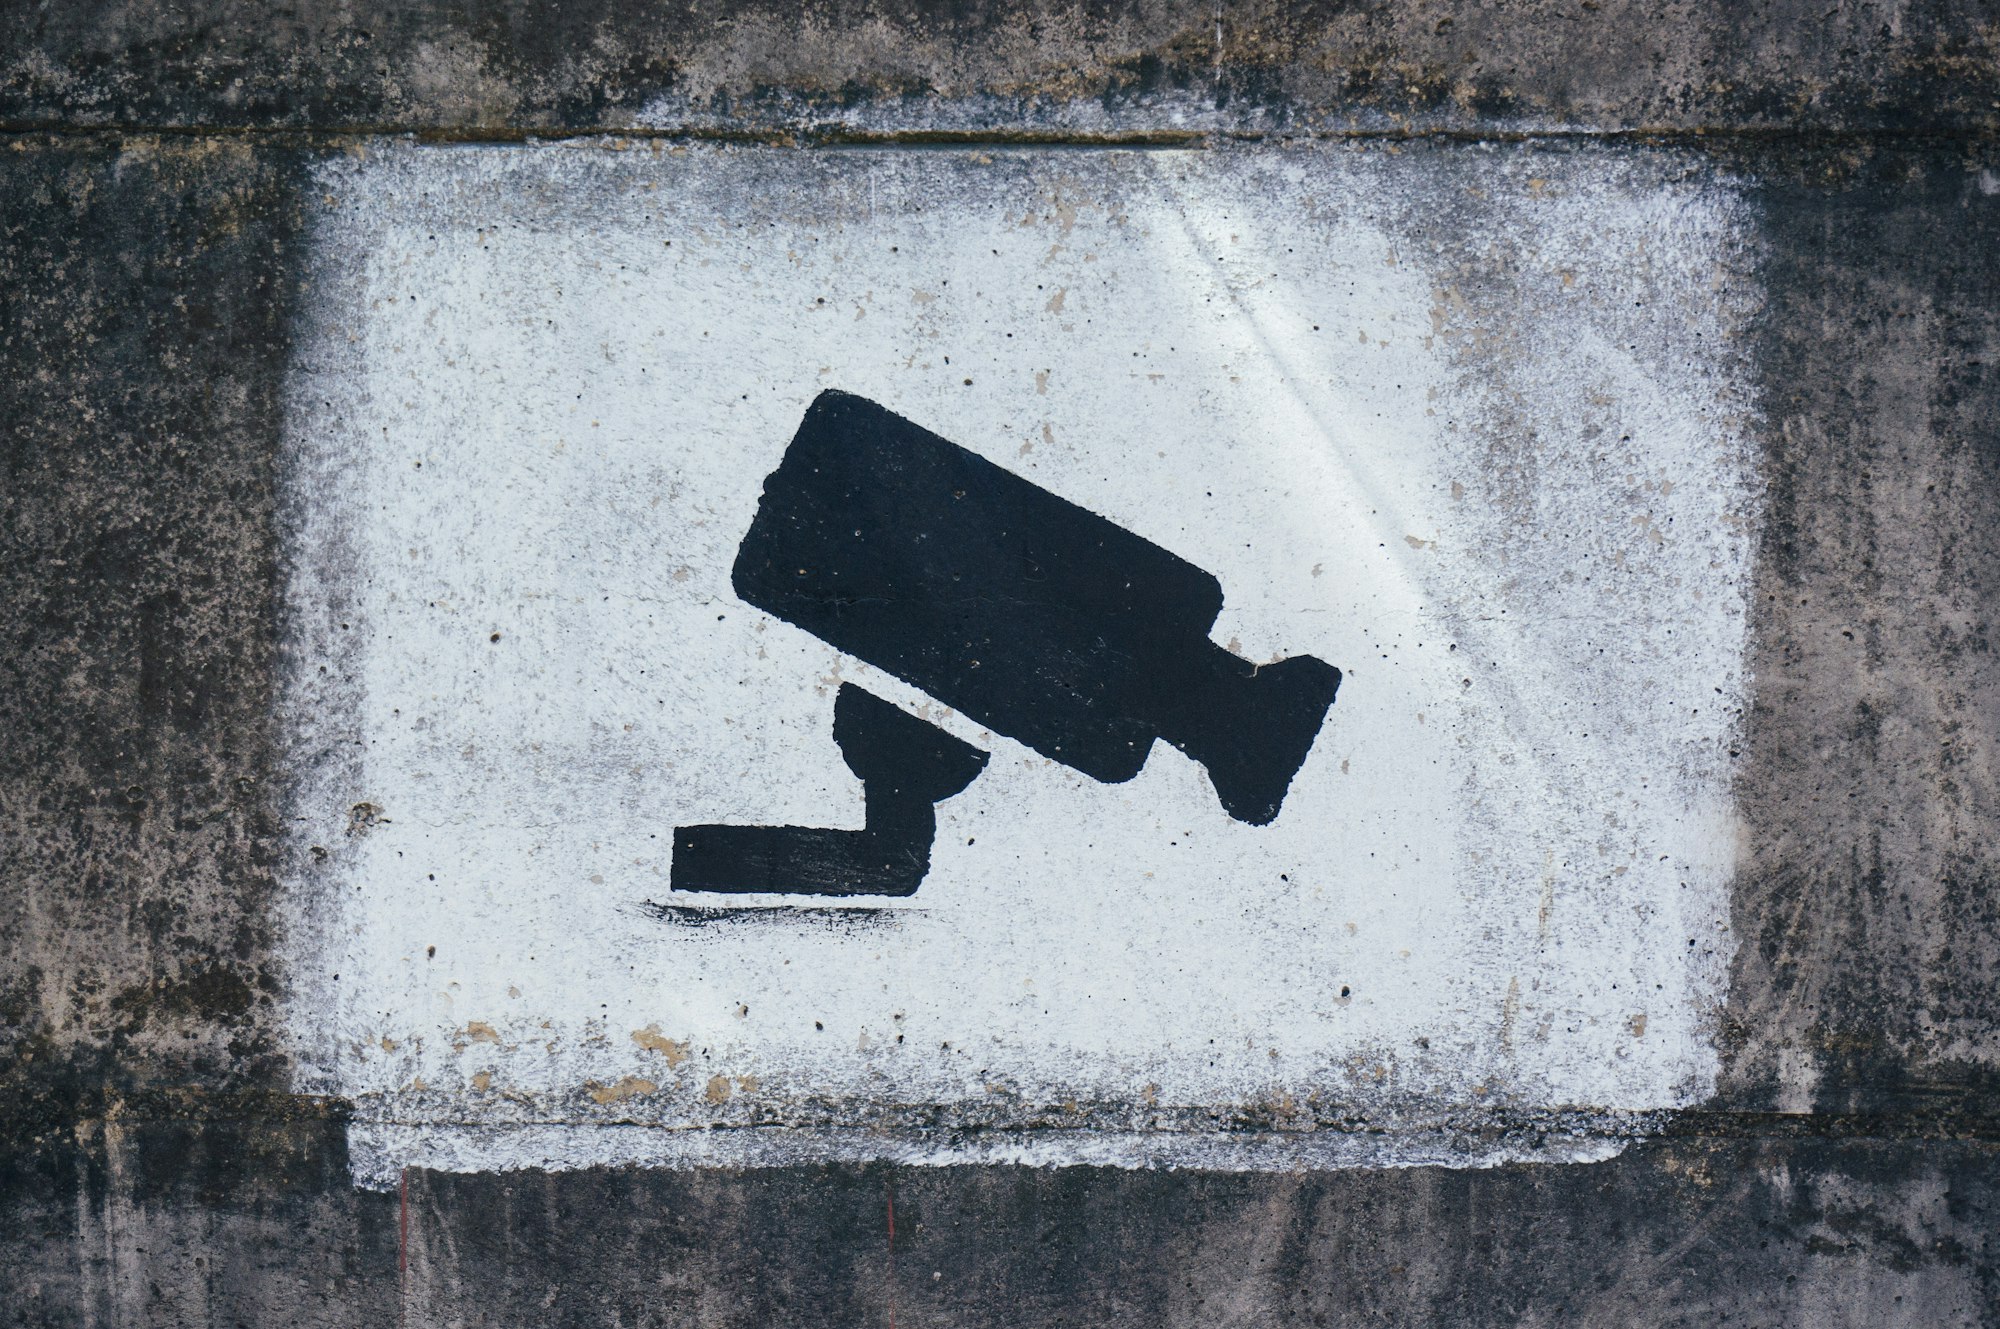 Surveillance and Lack of Data Privacy in the US is Under Scrutiny